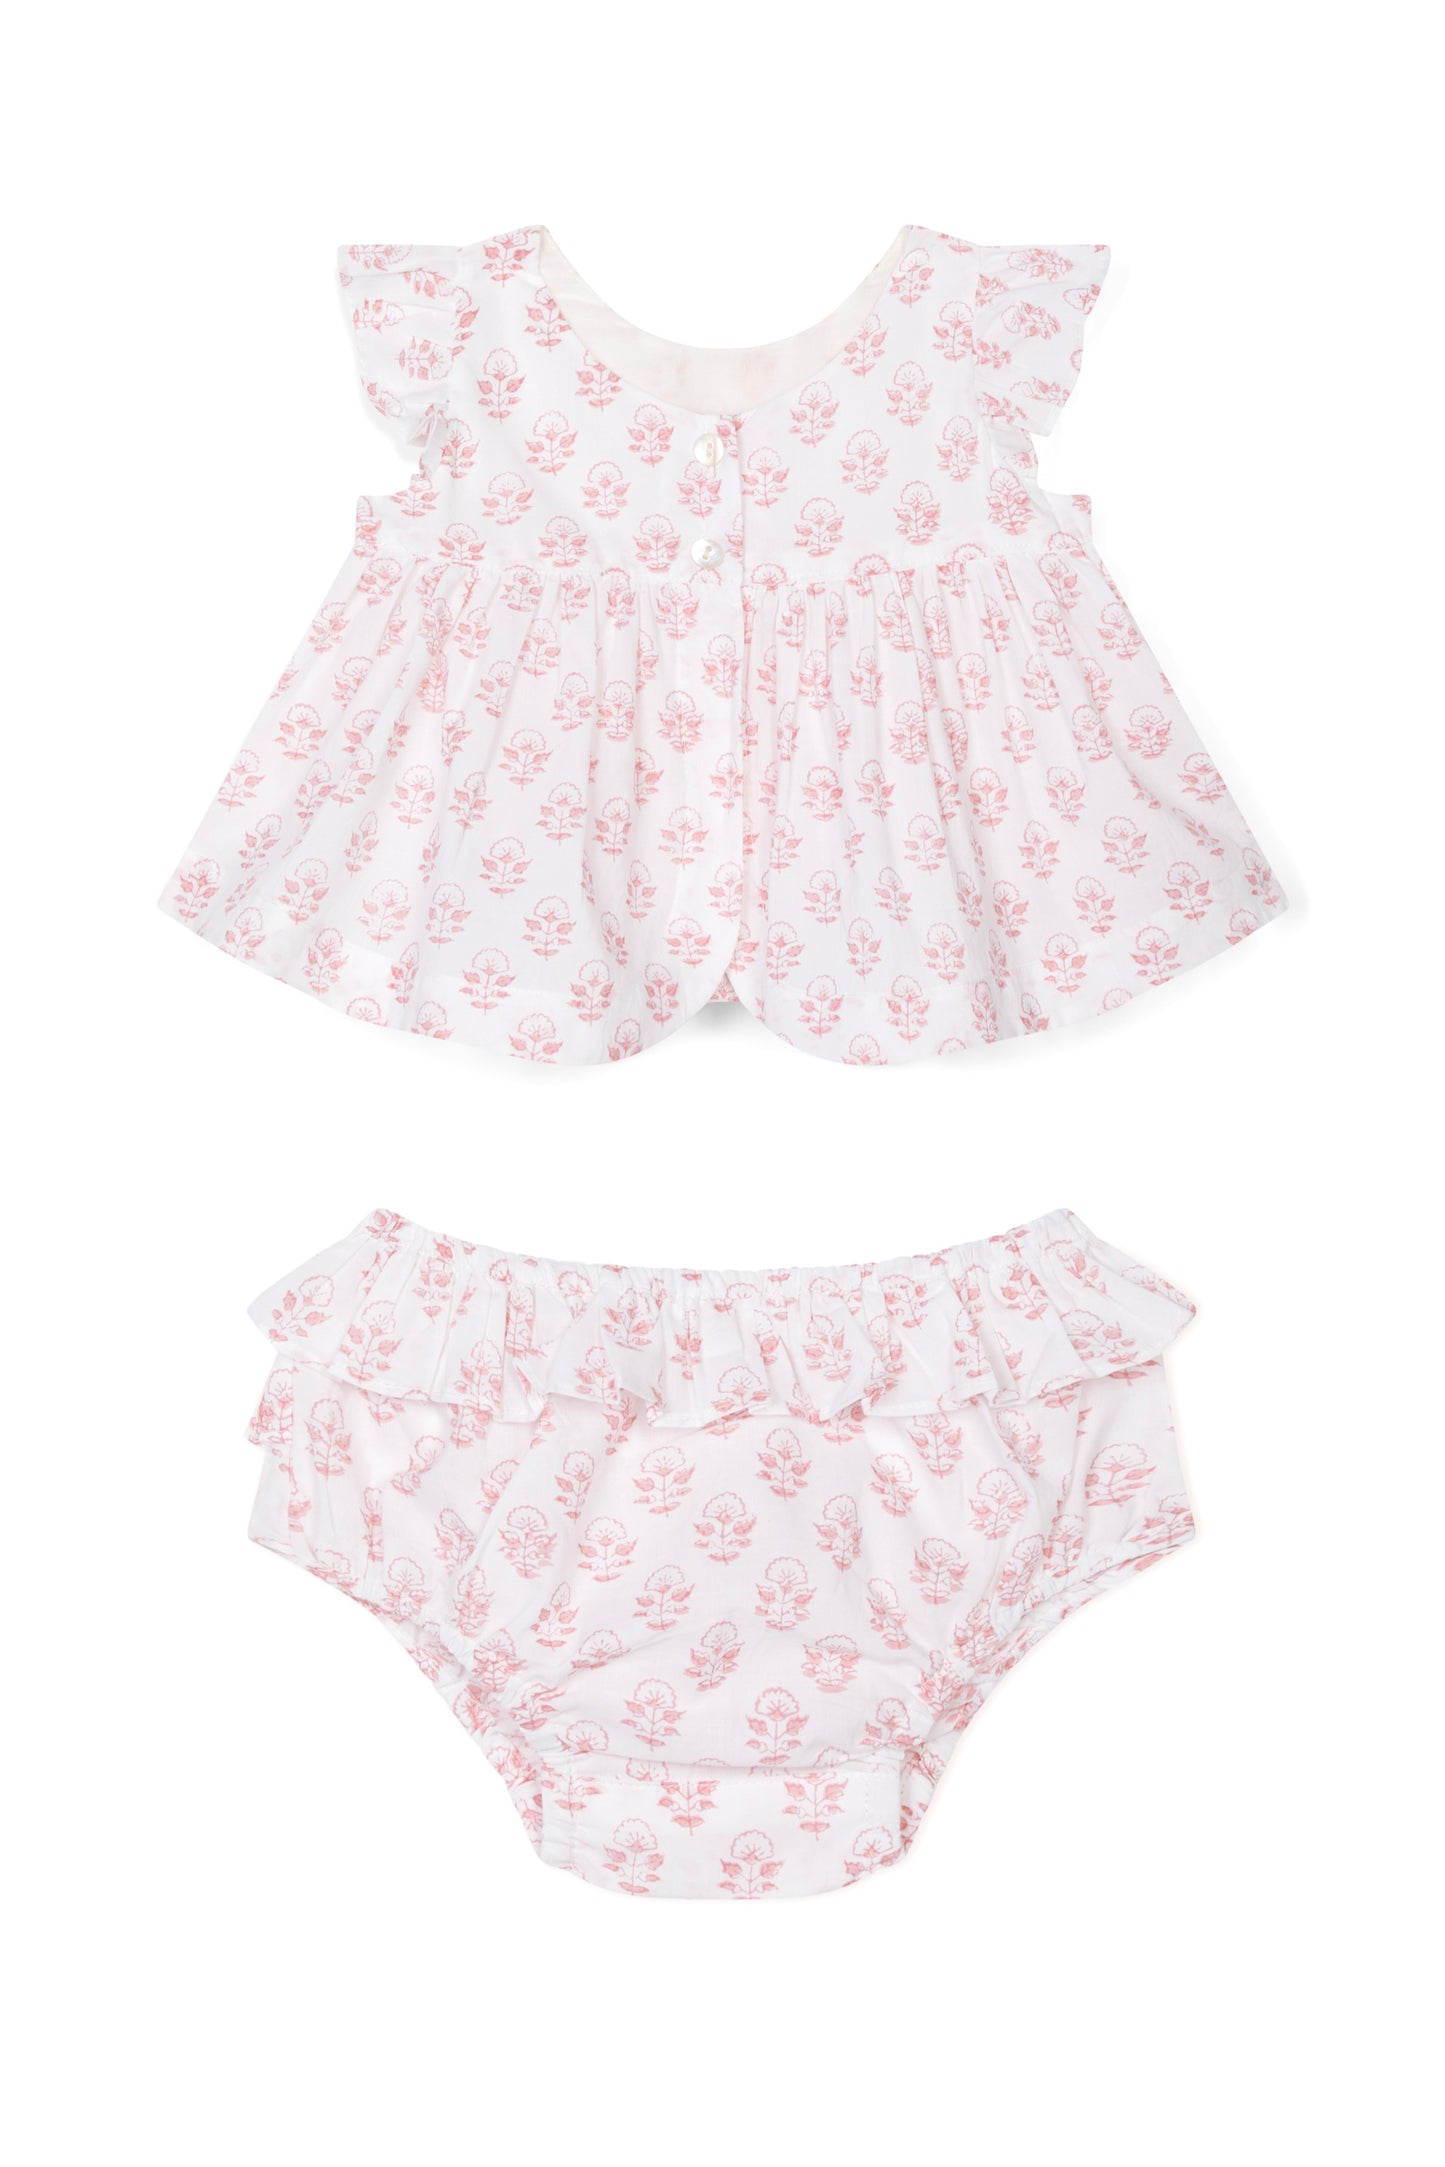 Pink Motif Top and Bloomers Set